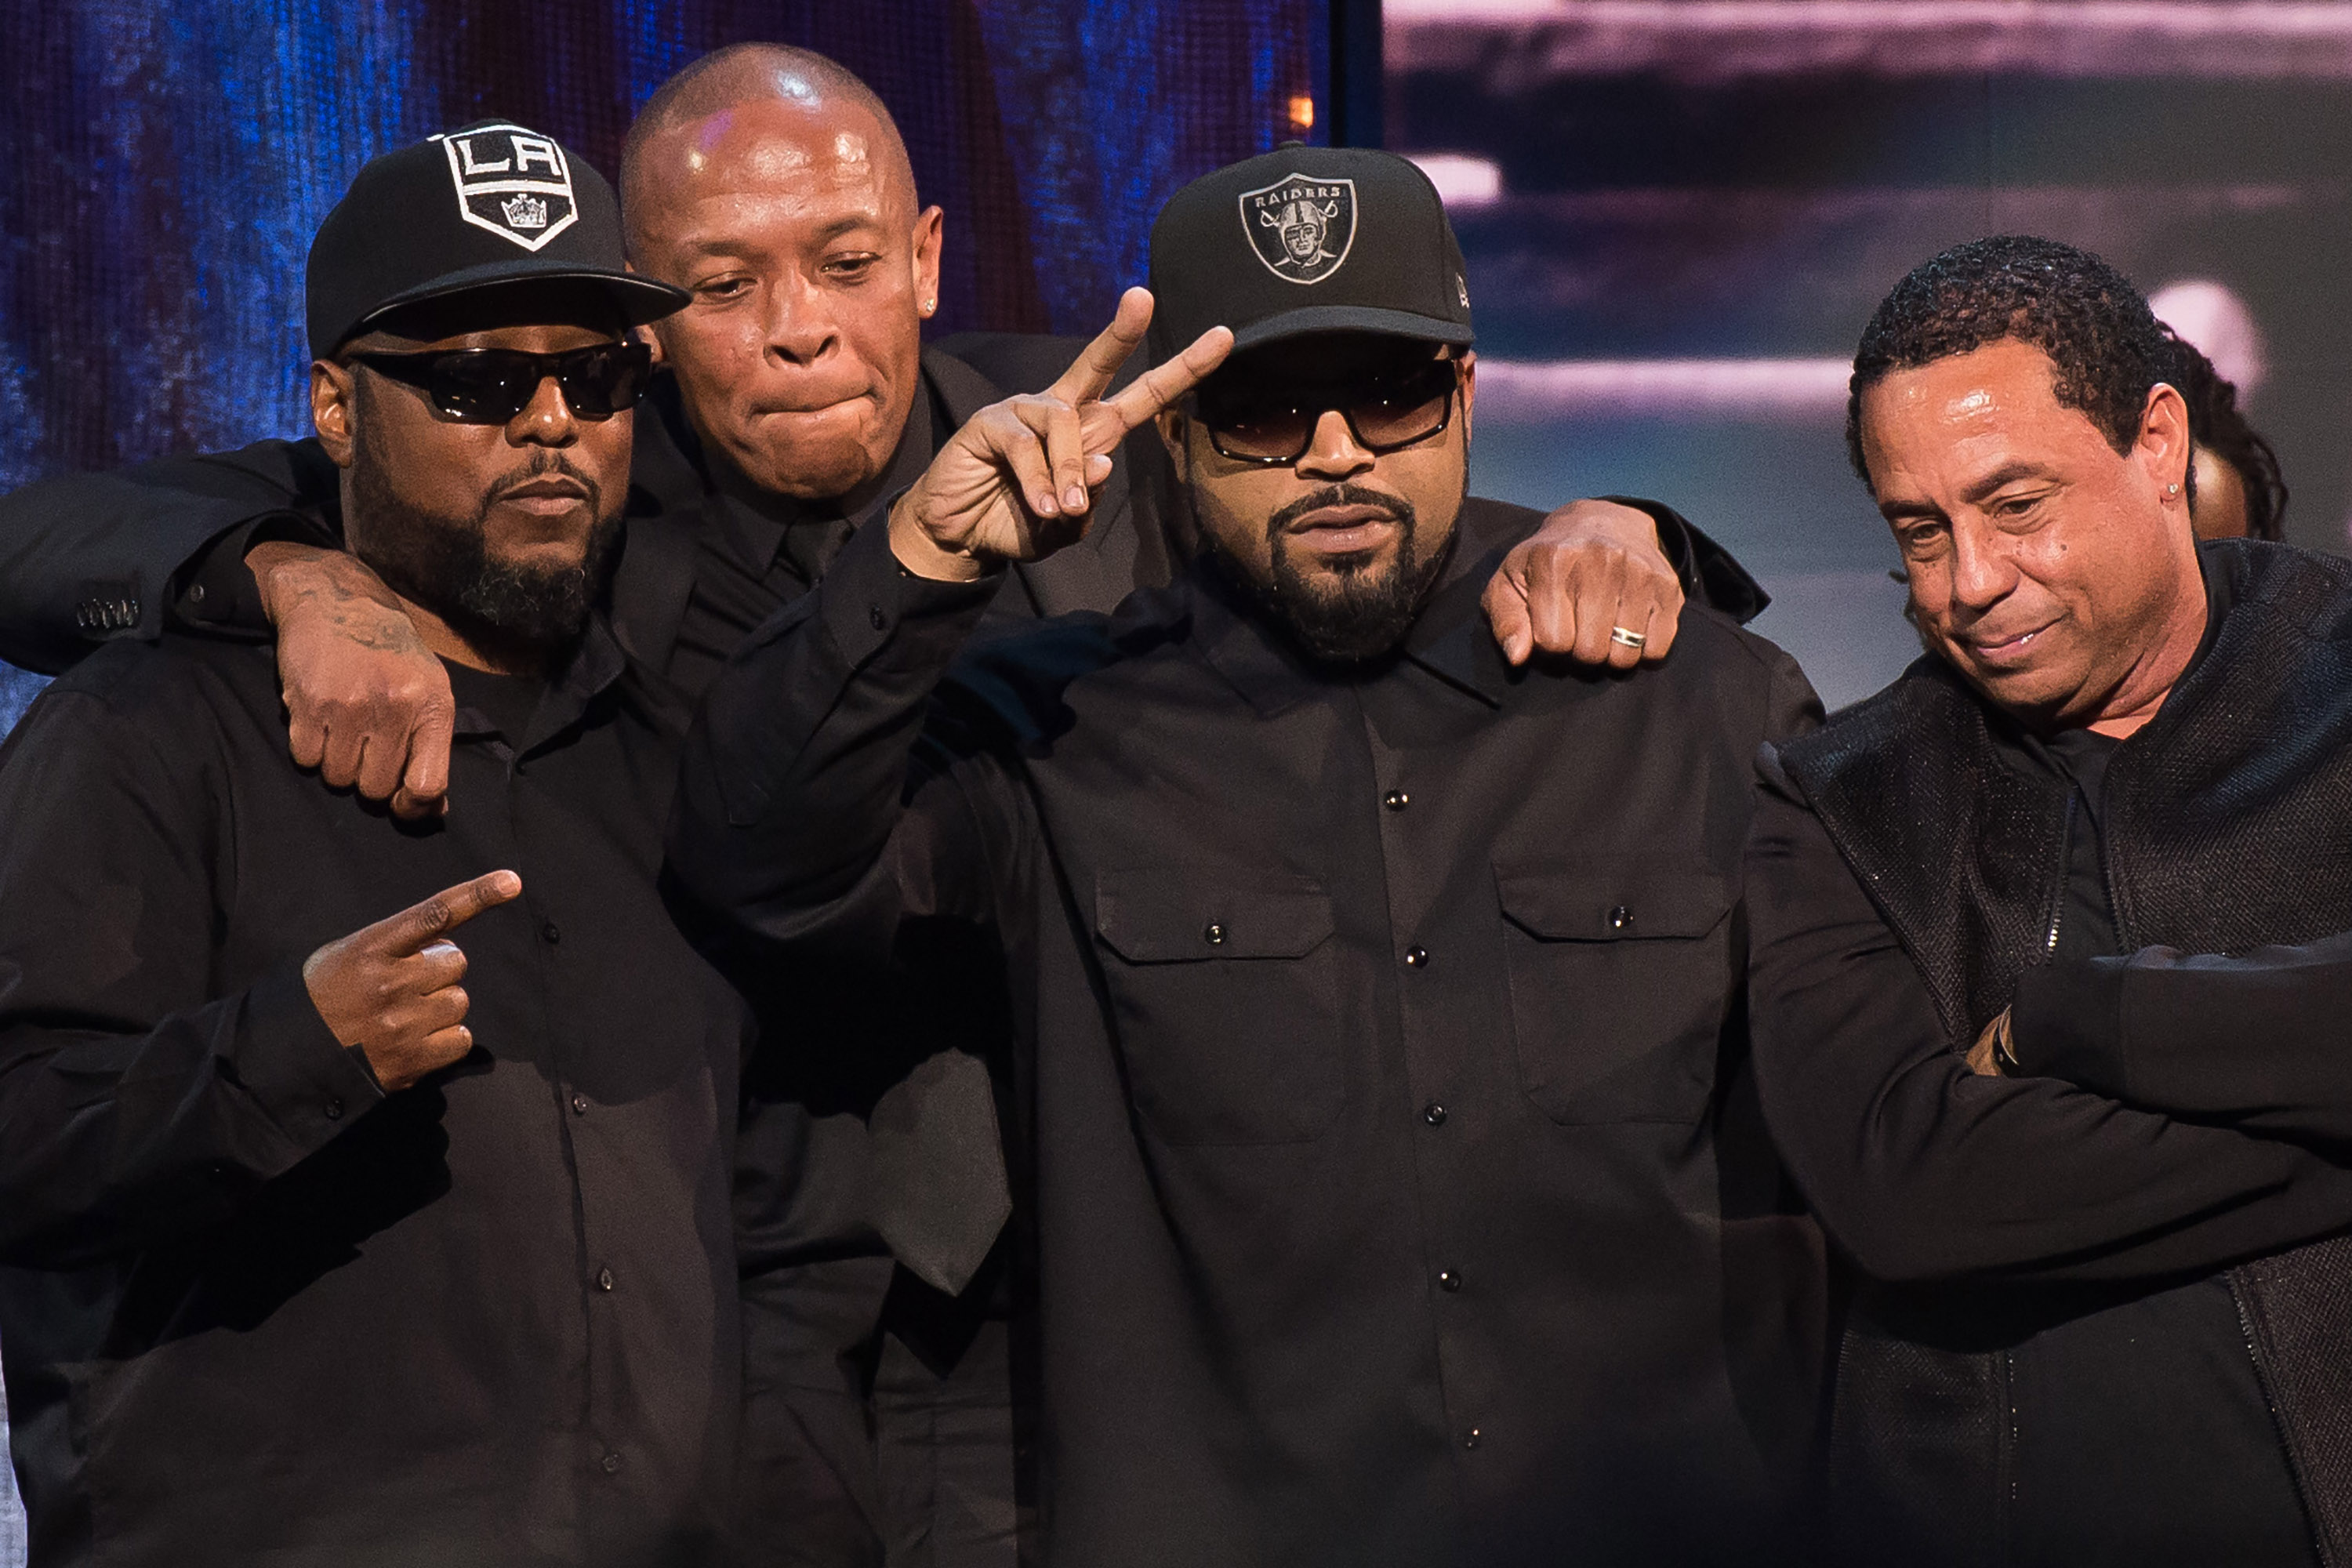 Inductees MC Ren, from left, Dr. Dre, Ice Cube and DJ Yella from N.W.A appear at the 31st Annual Rock and Roll Hall of Fame Induction Ceremony at the Barclays Center on Friday, April 8, 2016, in New York. (Photo by Charles Sykes/Invision/AP)